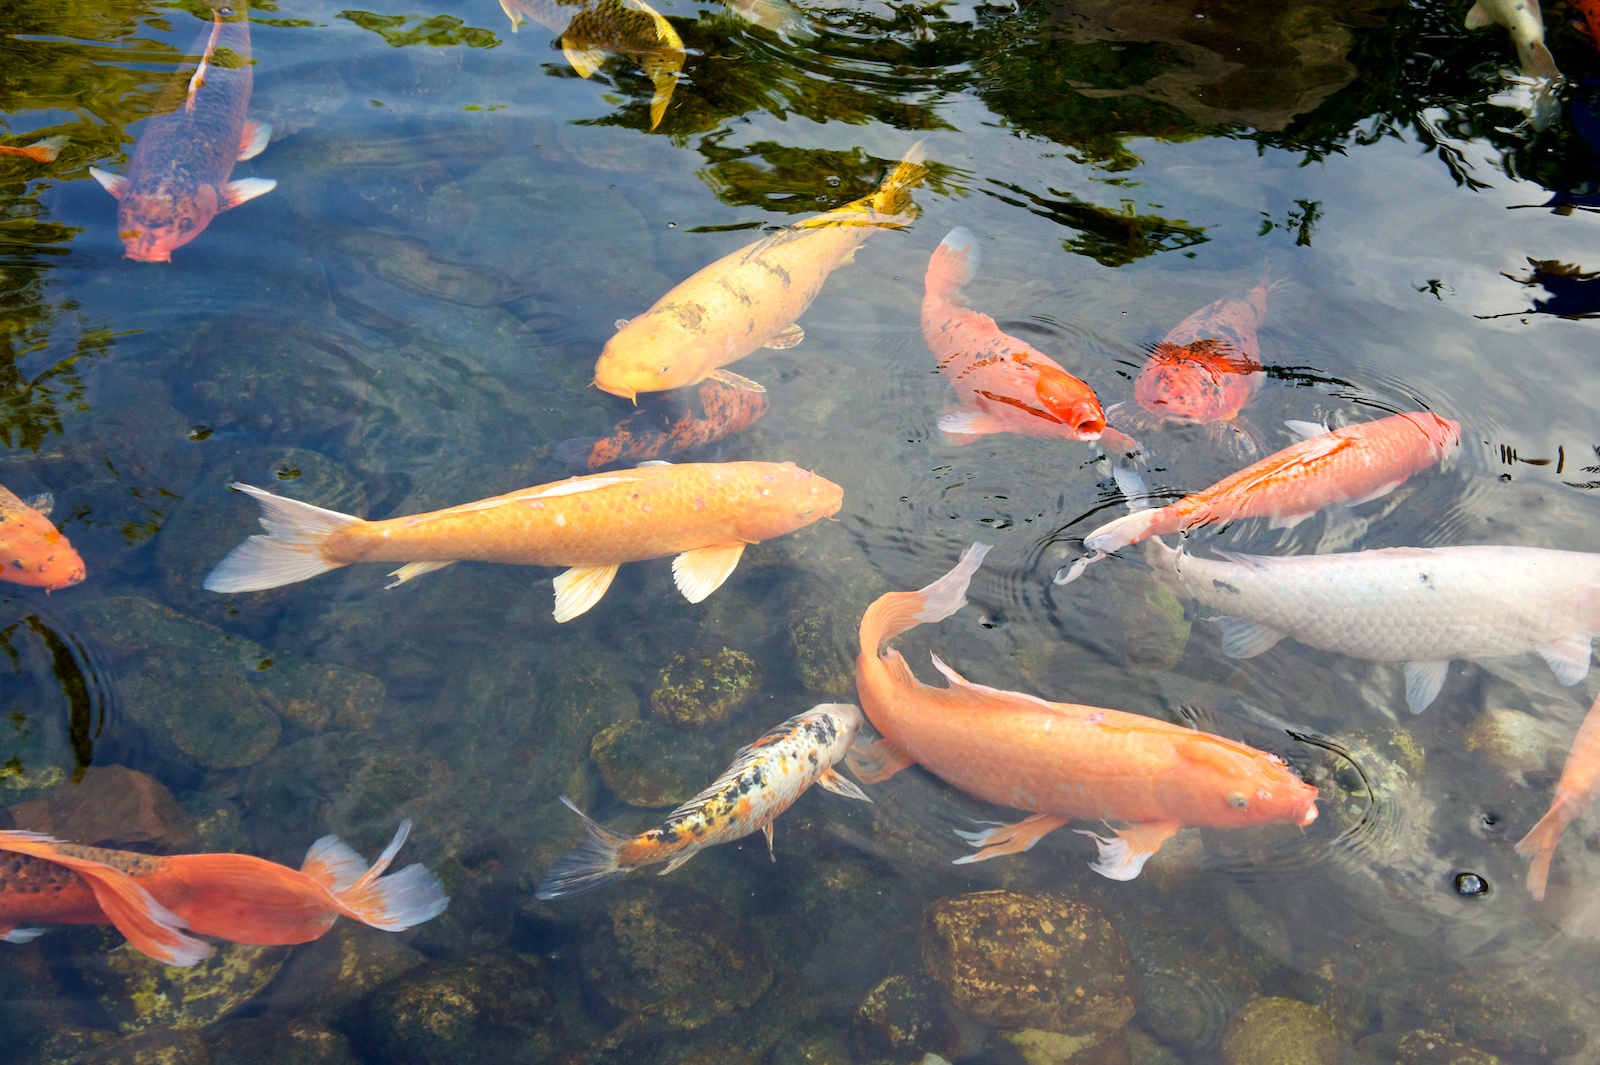 lots of koi swimming around and in the pond